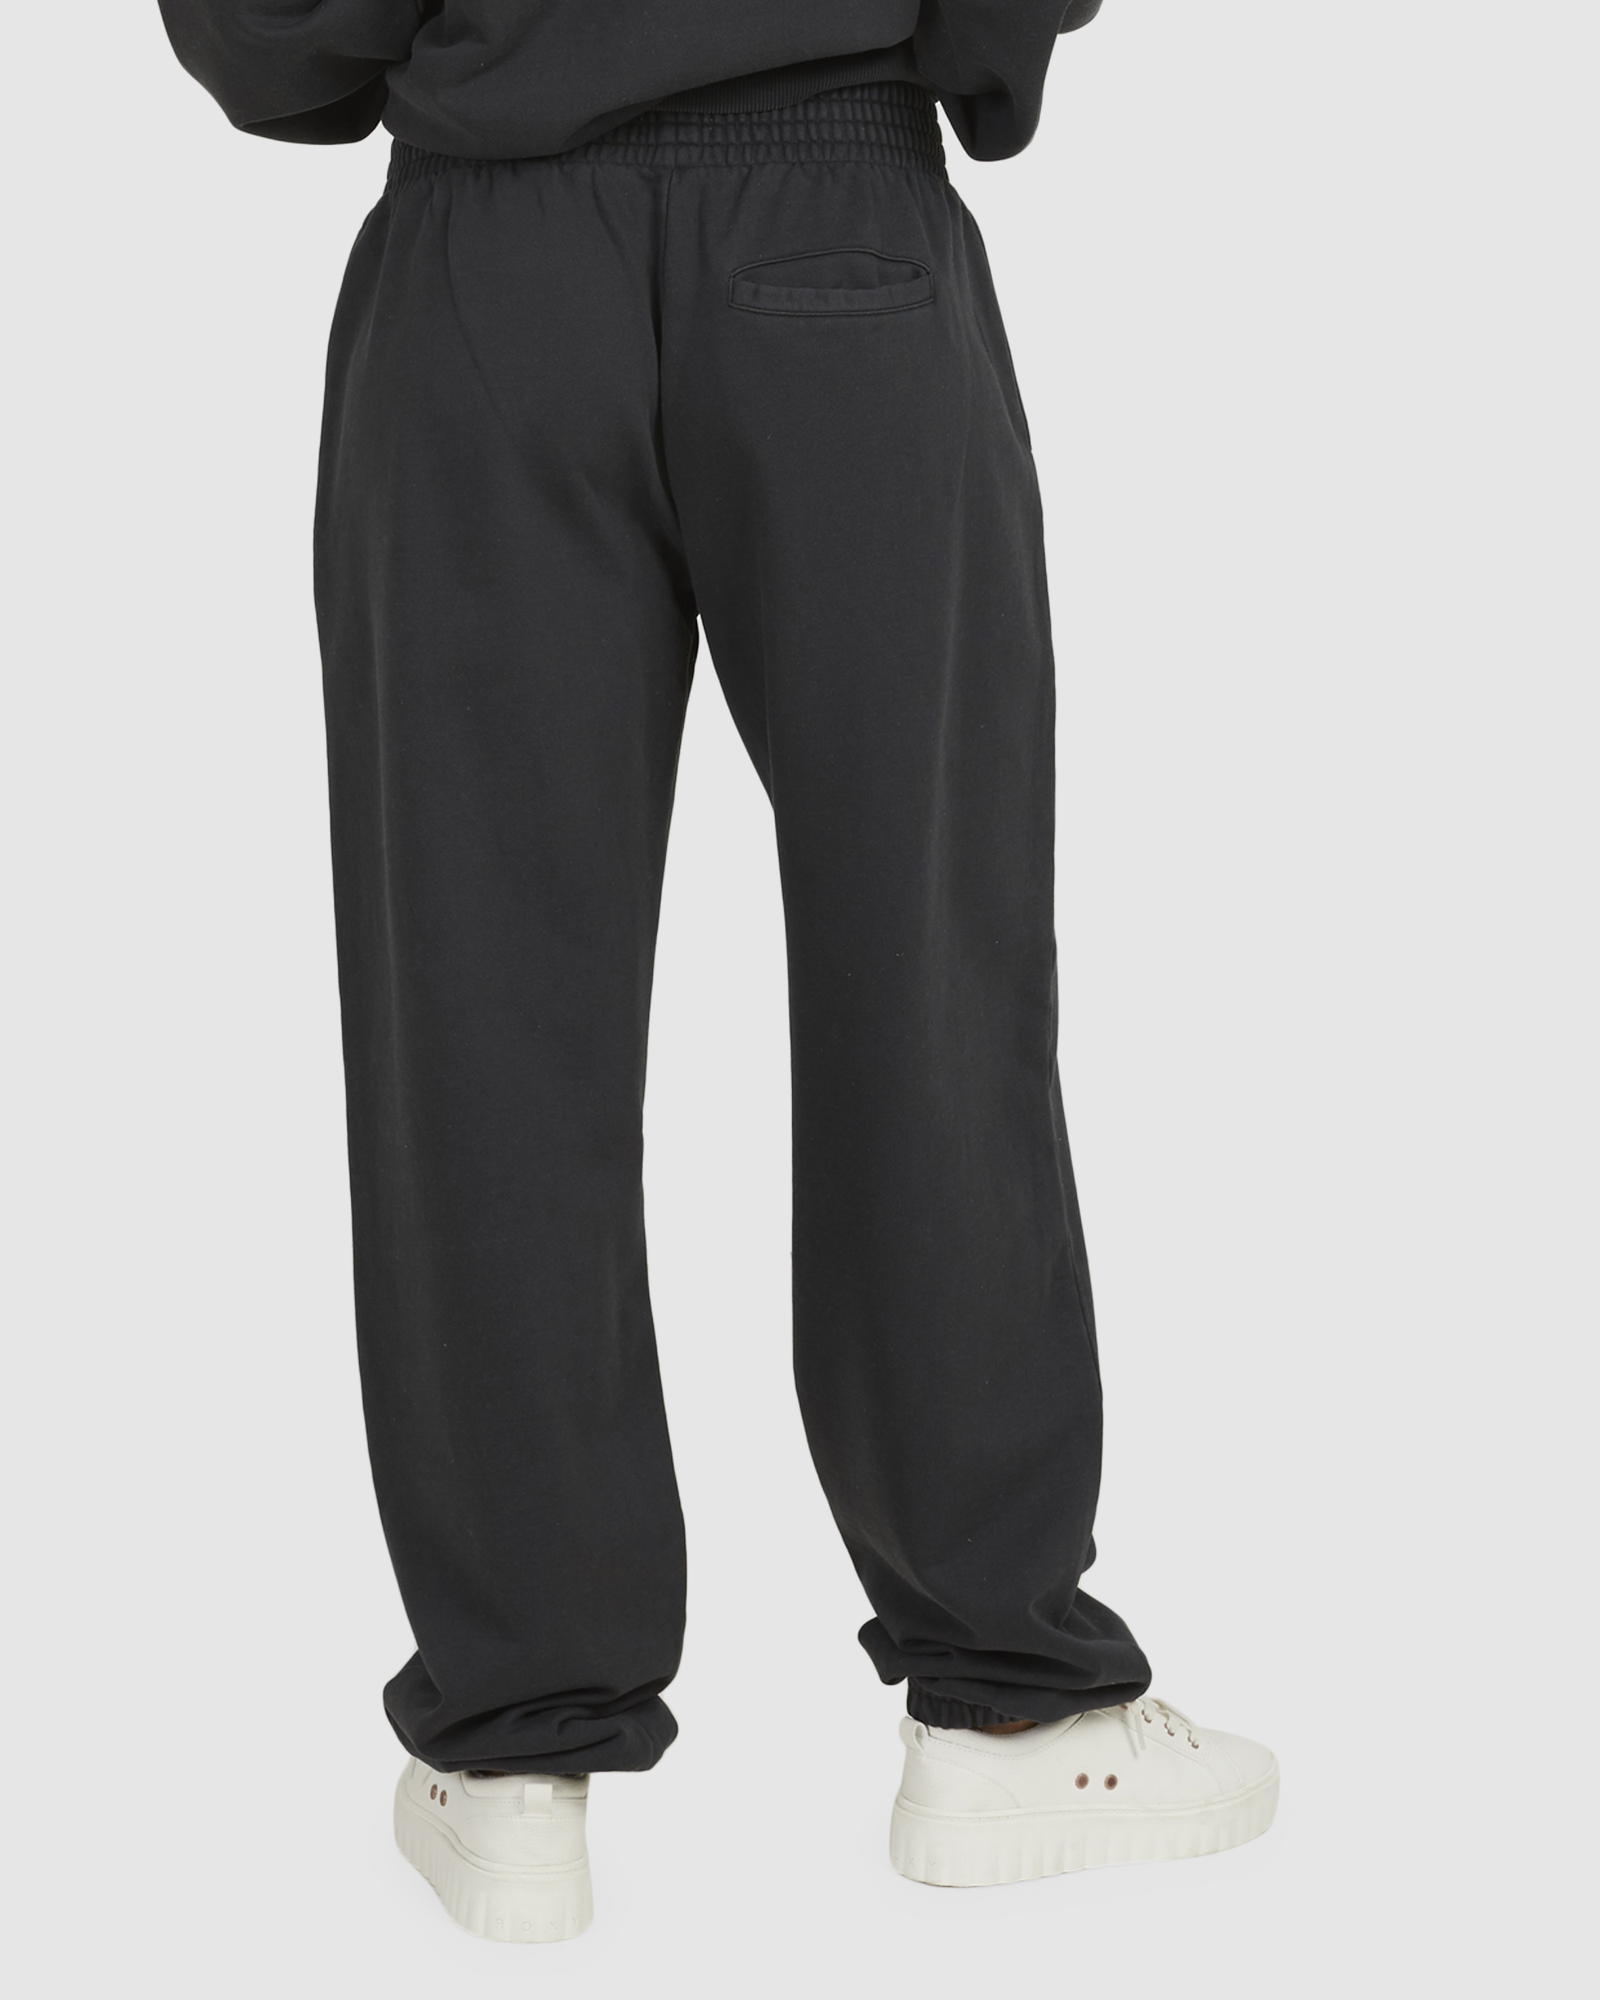 Roxy Move On Up Track Pant - Anthracite | SurfStitch